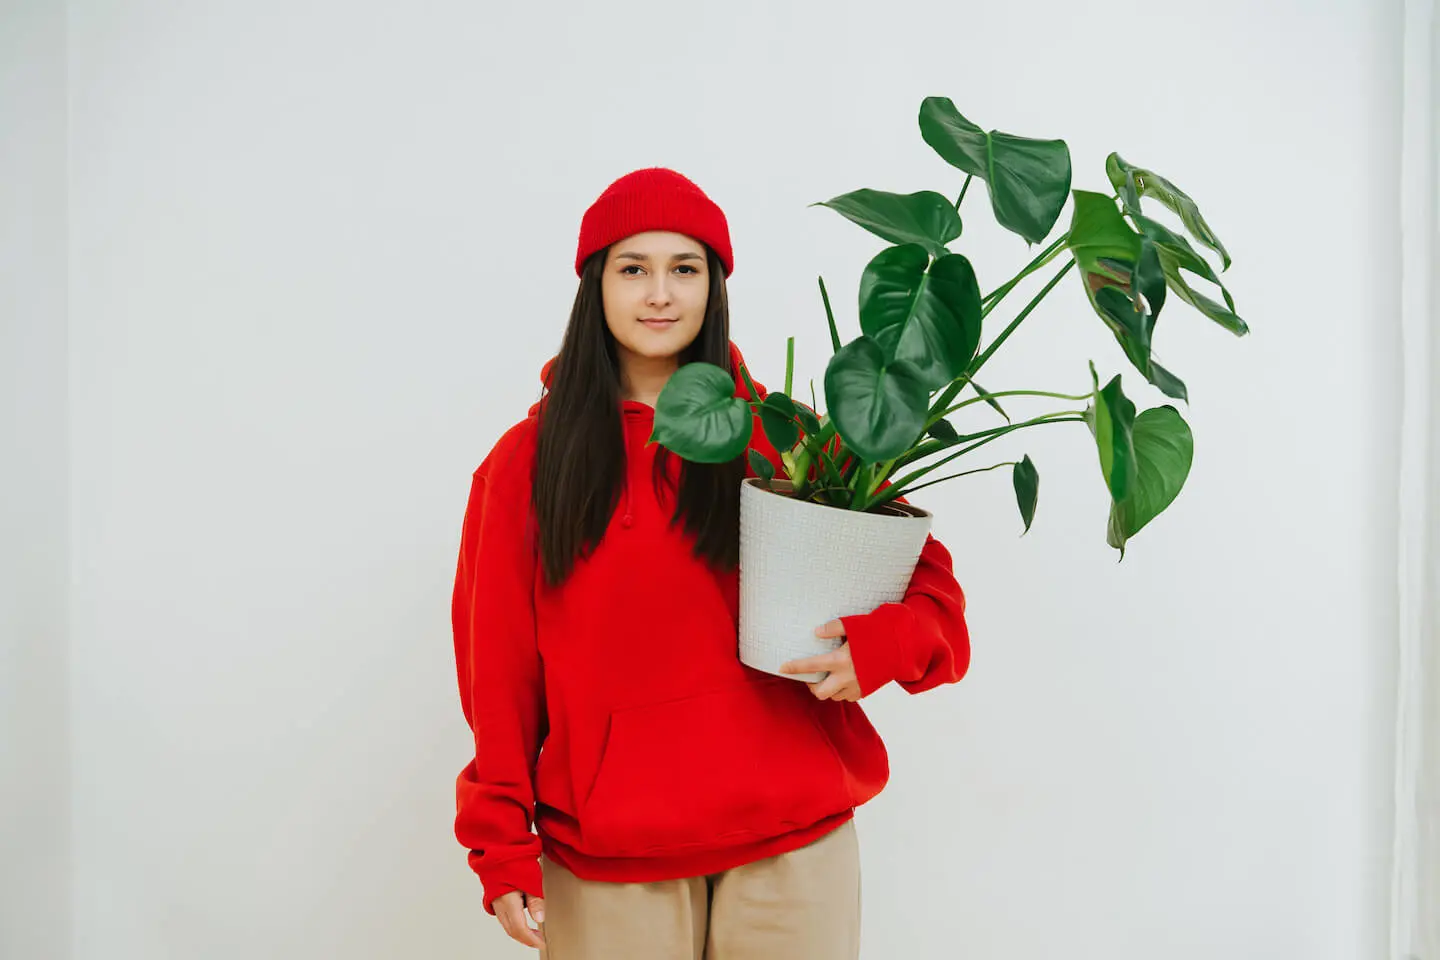 Earth Day activities for kids: woman carrying a potted plant